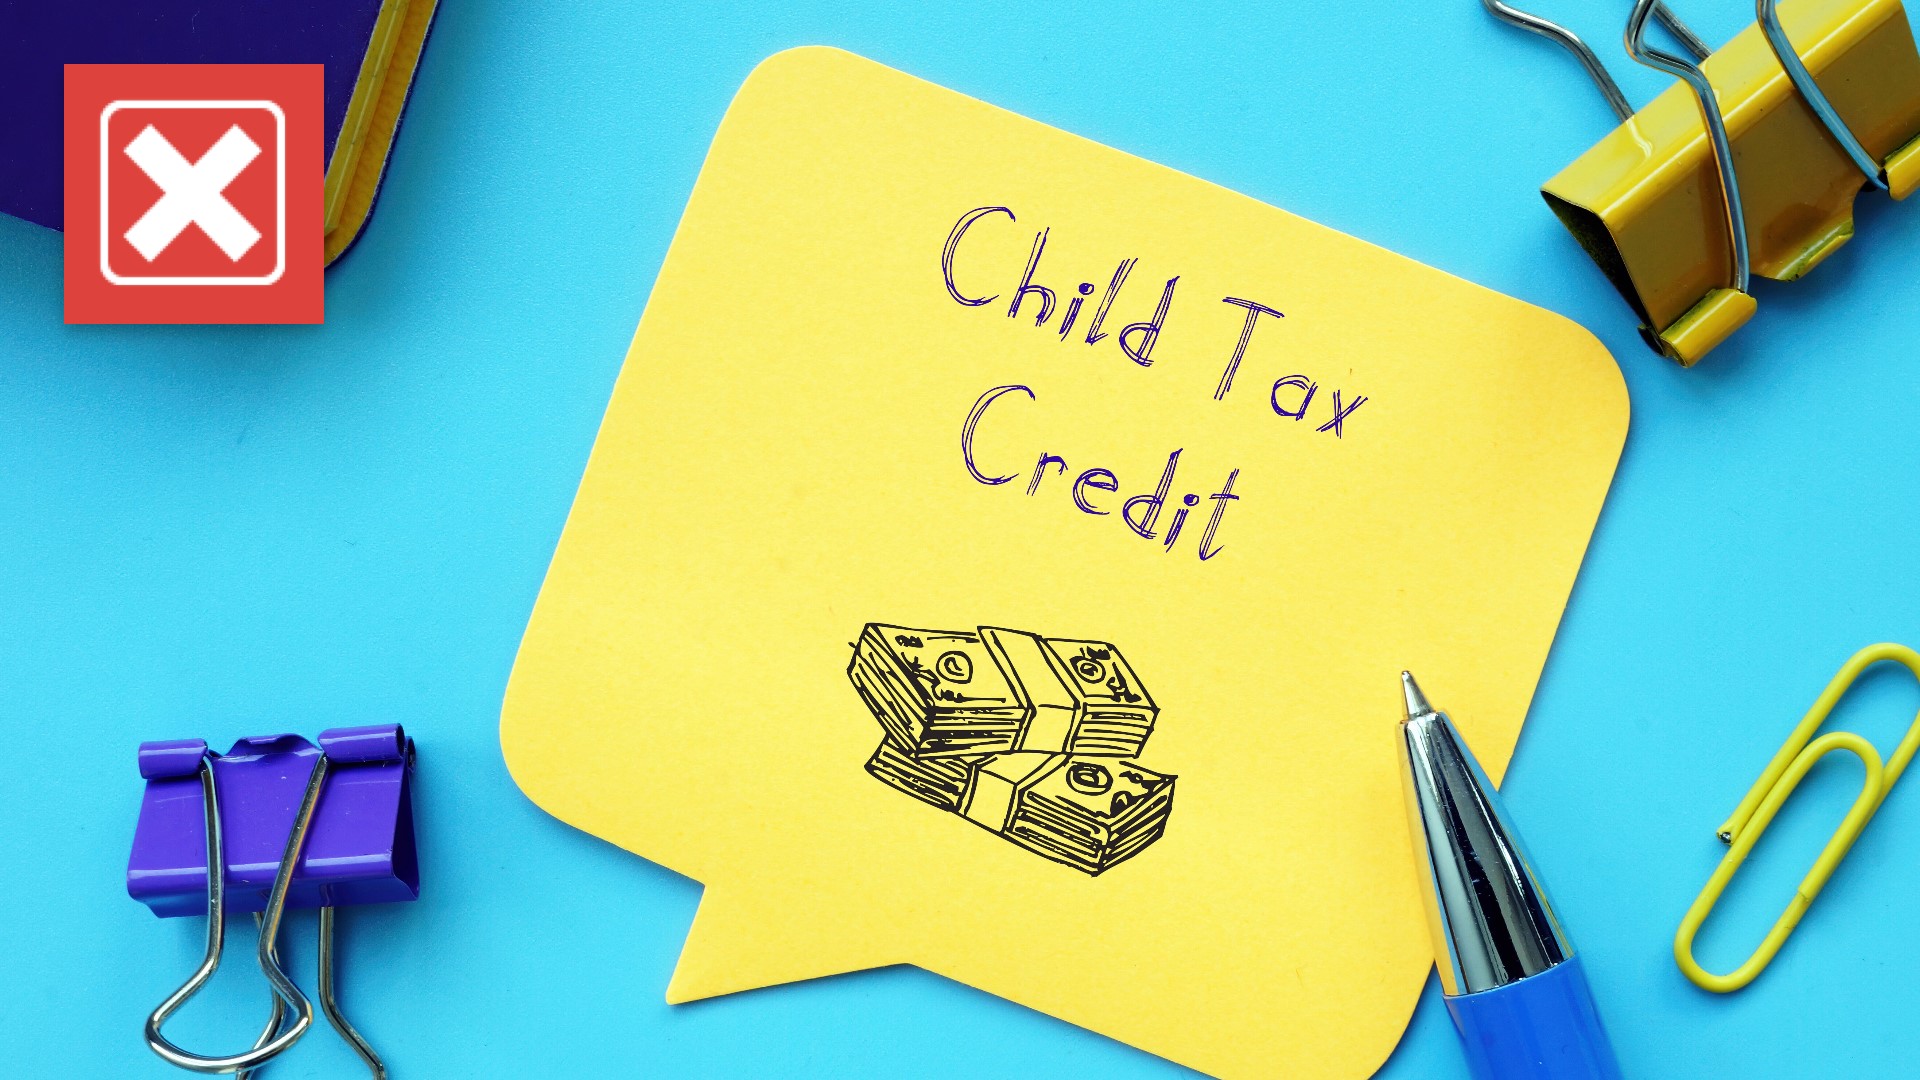 advance-child-tax-credit-no-guidance-yet-for-divorced-parents-kiiitv